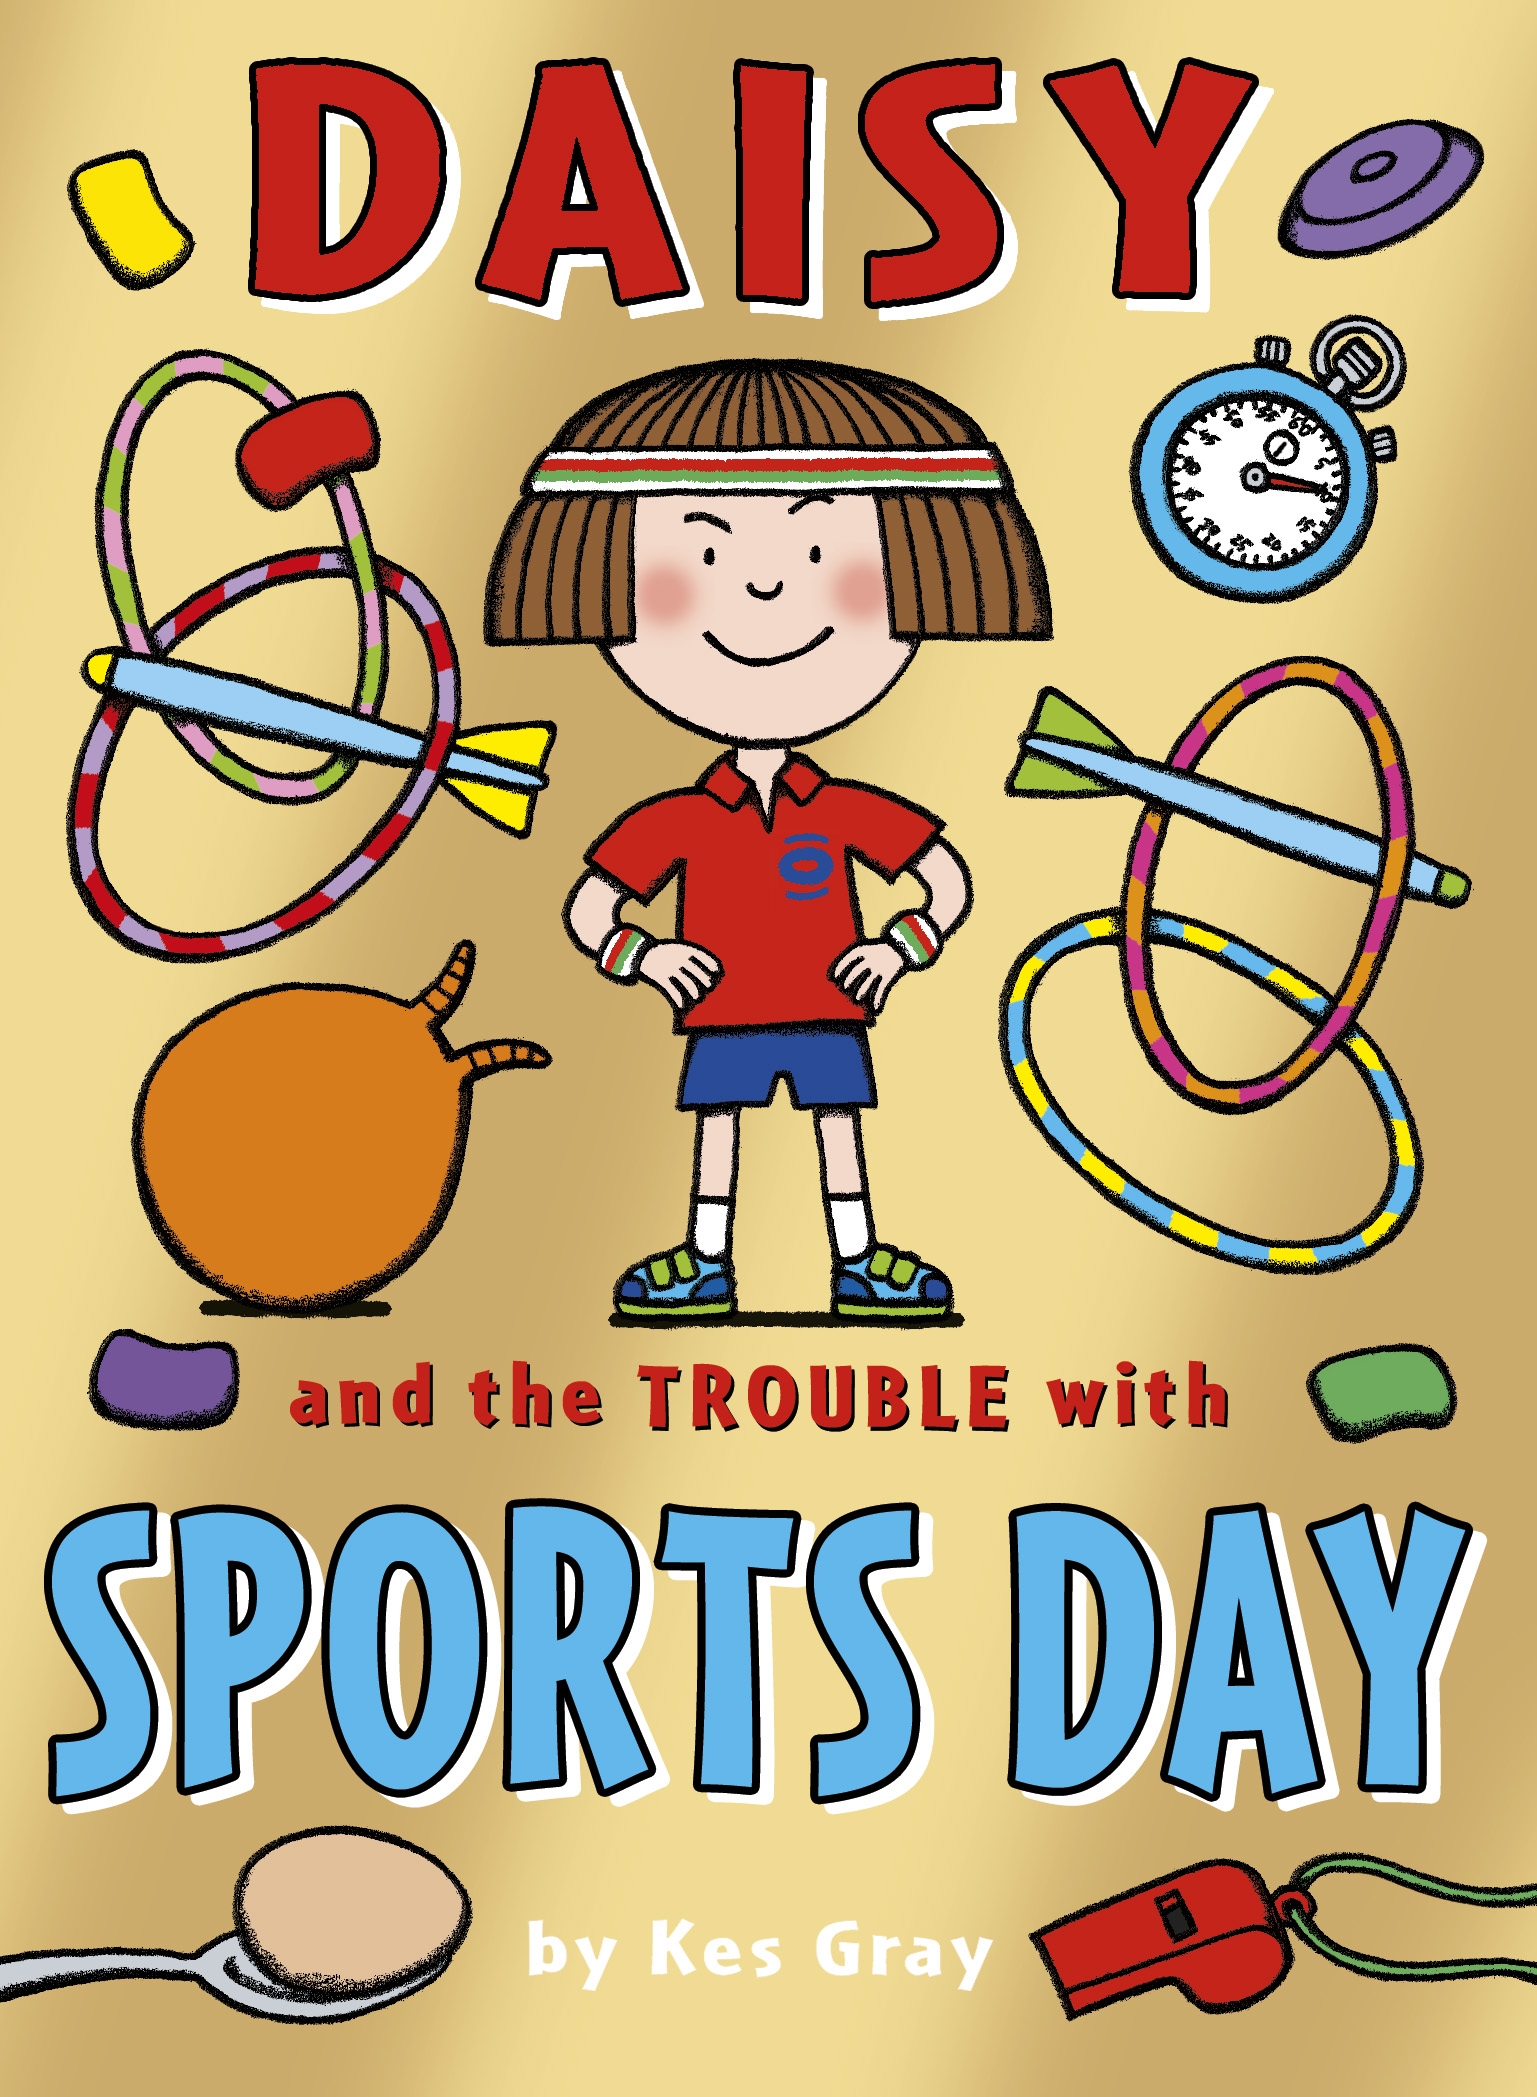 Daisy and the Trouble with Sports Day by Kes Gray - Penguin Books